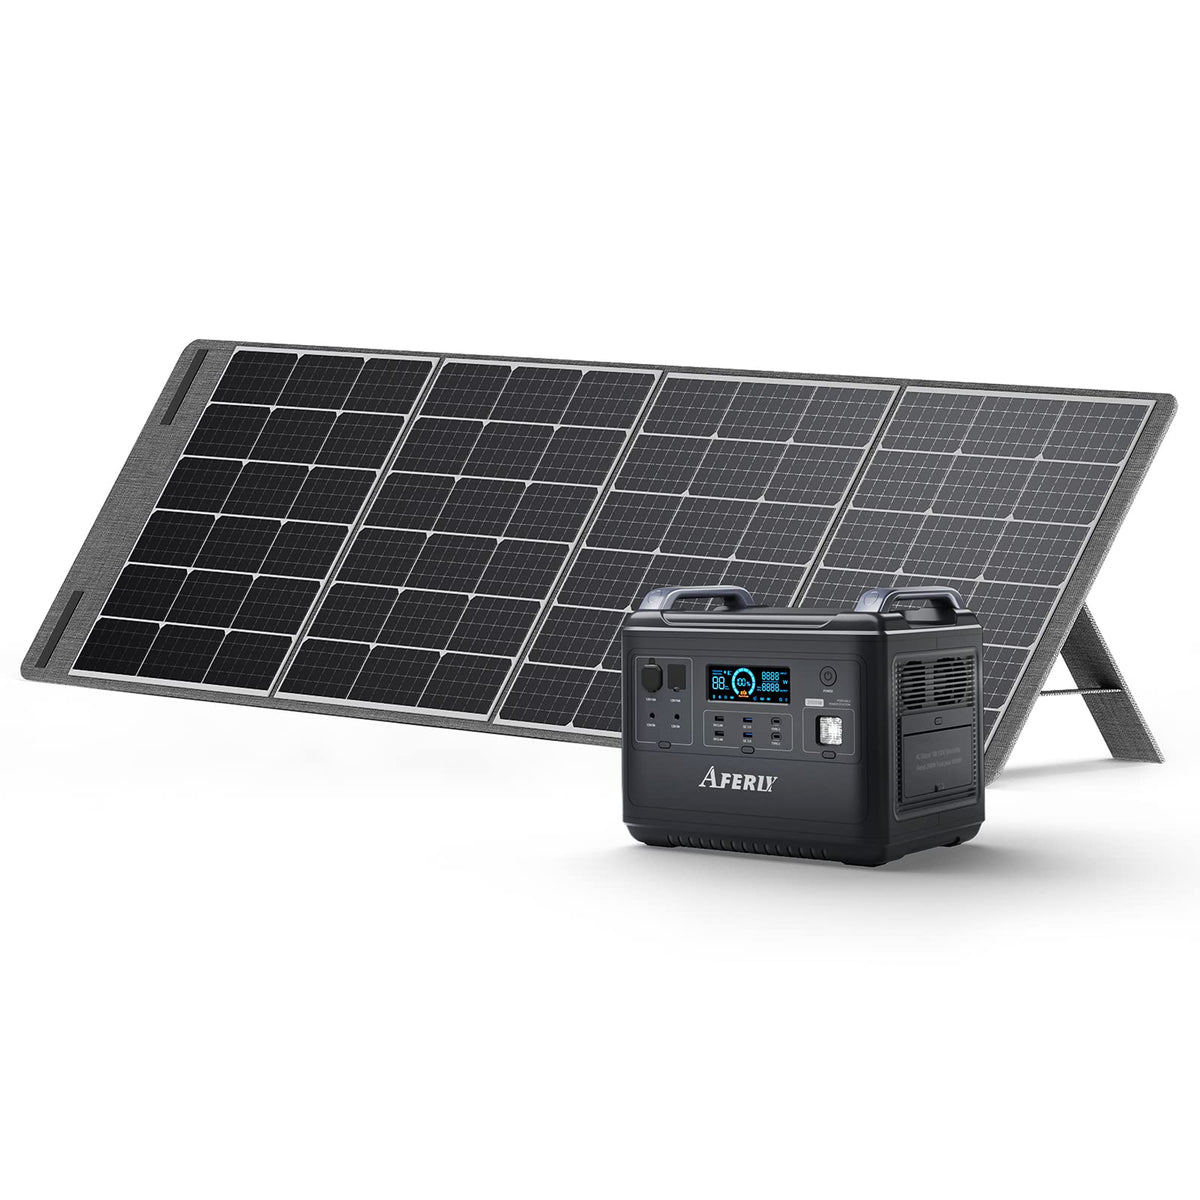 AFERIY Solar Kit with 2000W Portable Power Station and 200W Solar Panel – AFERIY